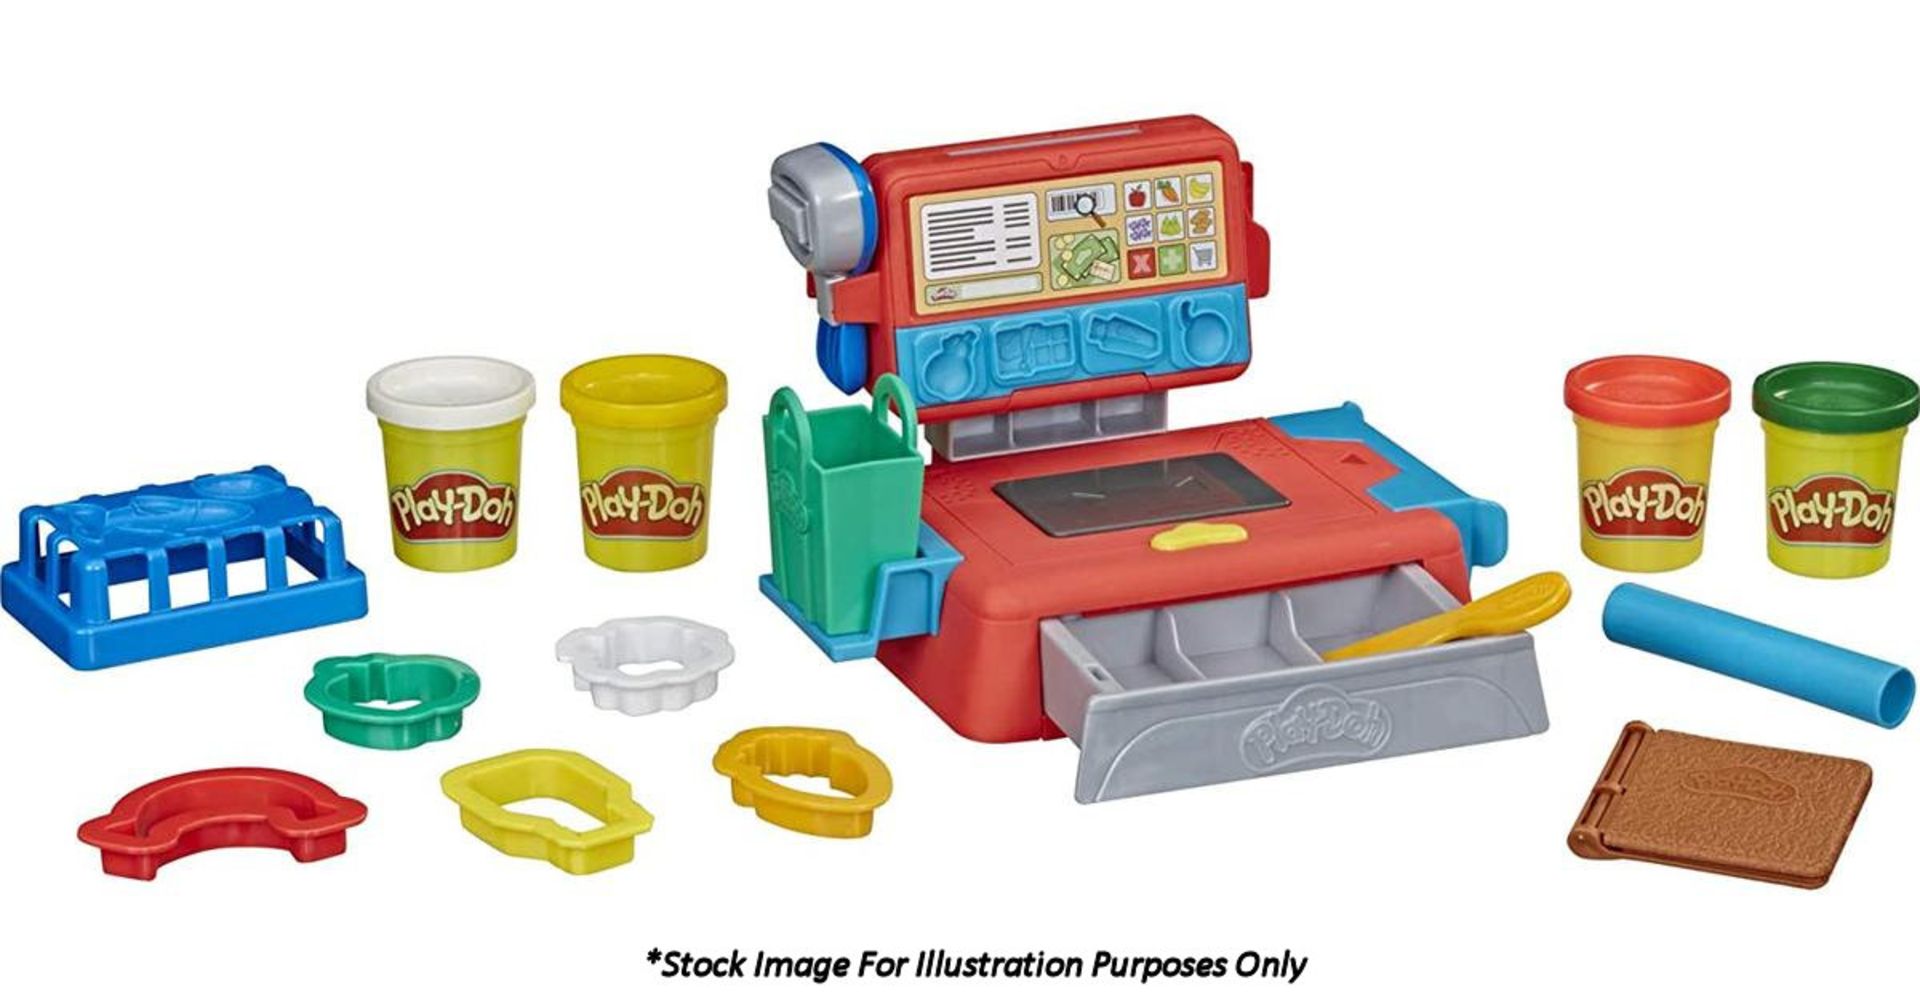 1 x Play-Doh Cash Register - New/Boxed